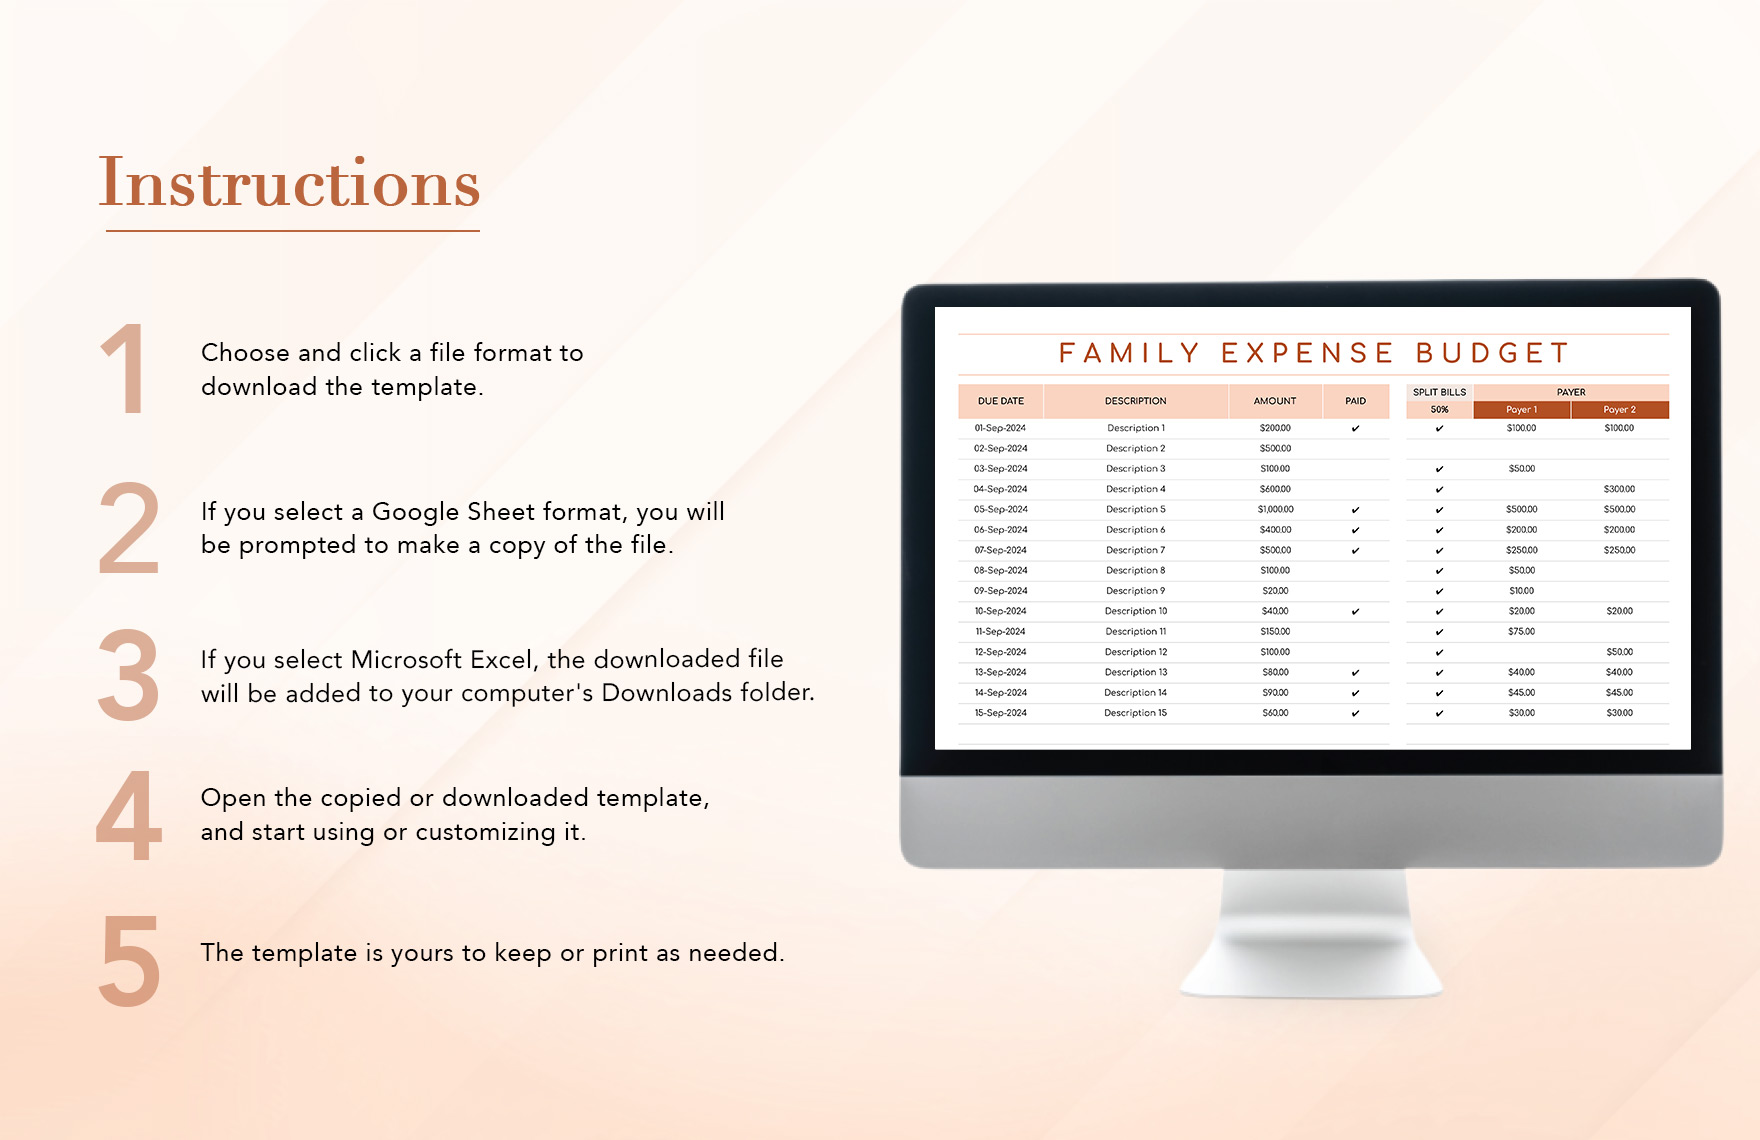 House Hold, Family Expense Budget Template